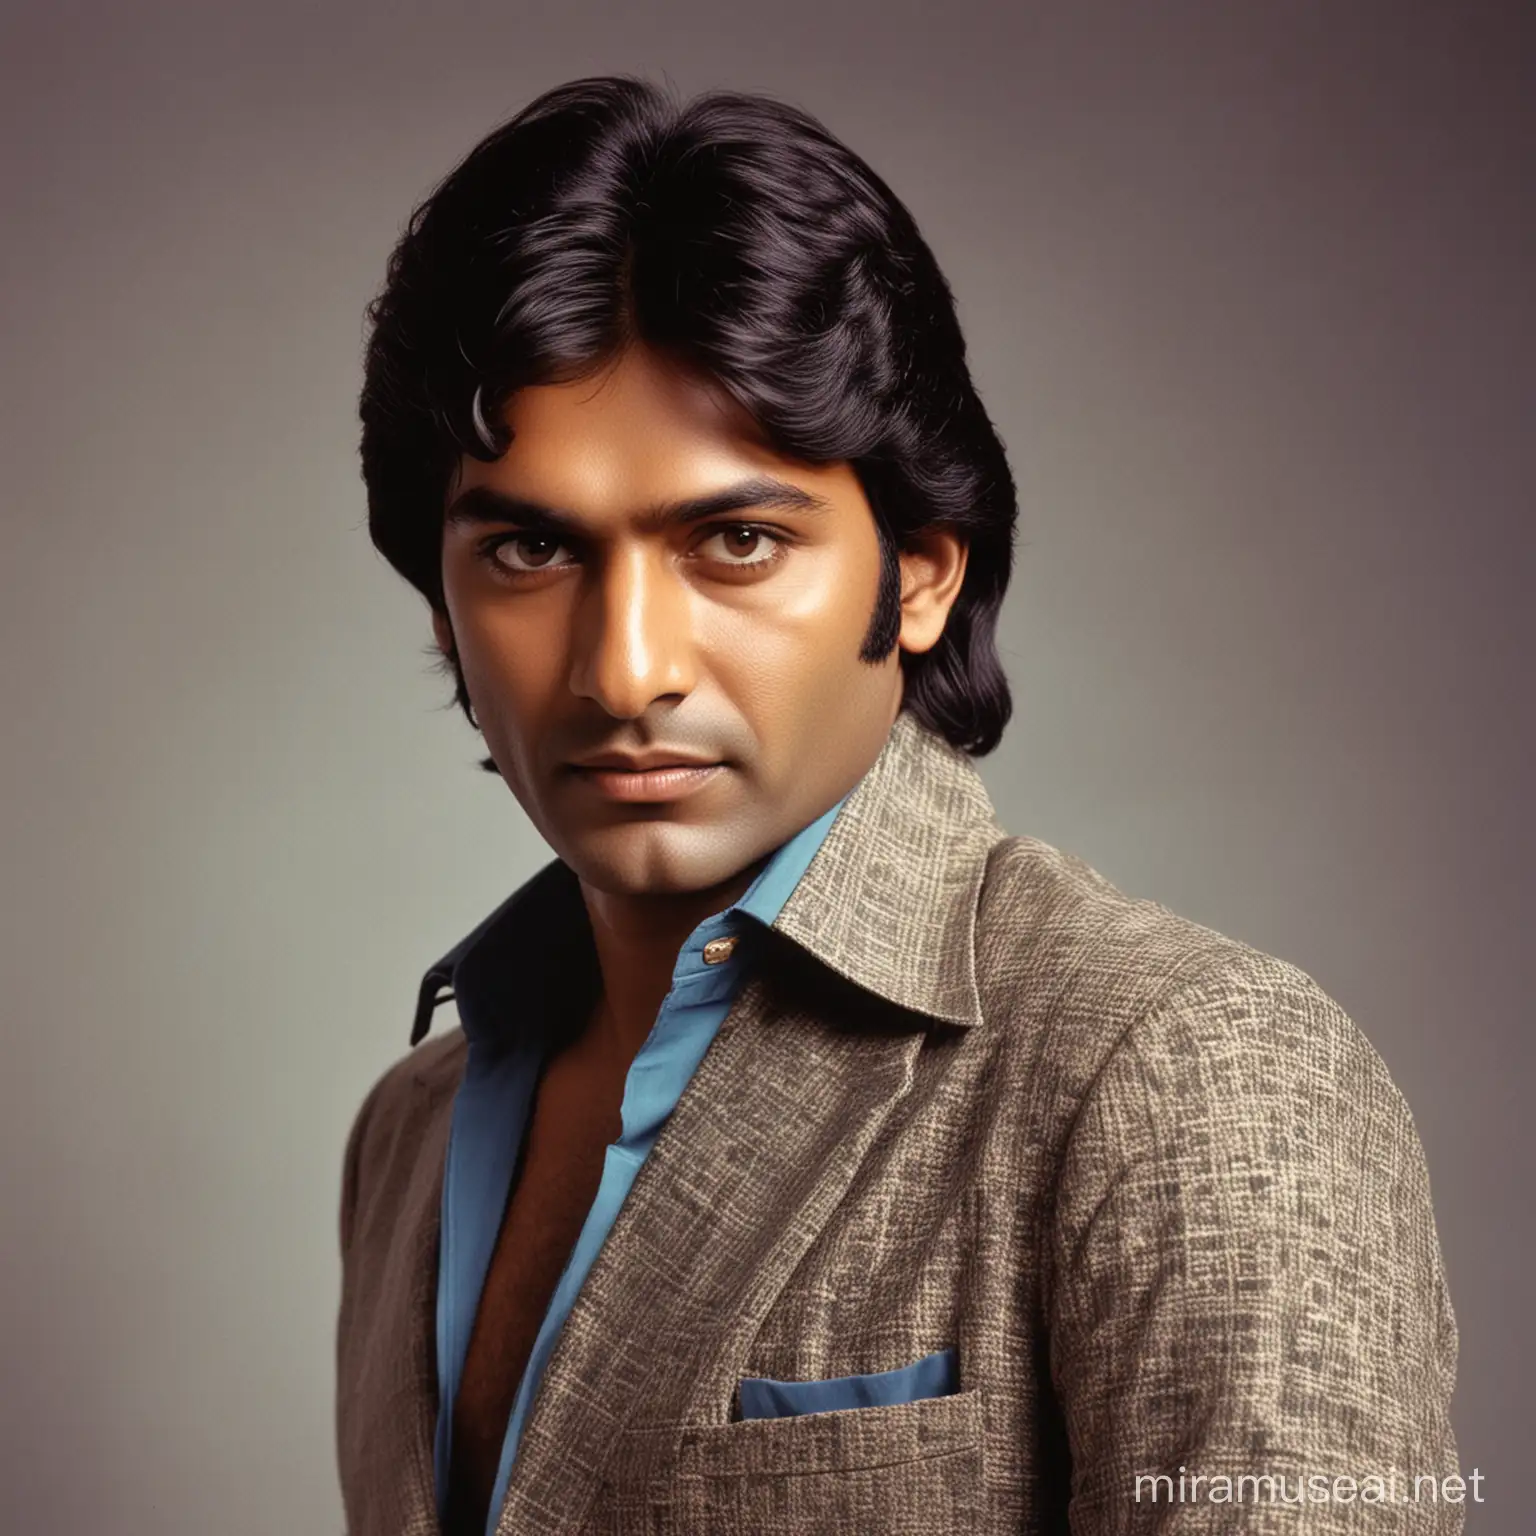 fake male indian celebrity in the 70s 

colour 
